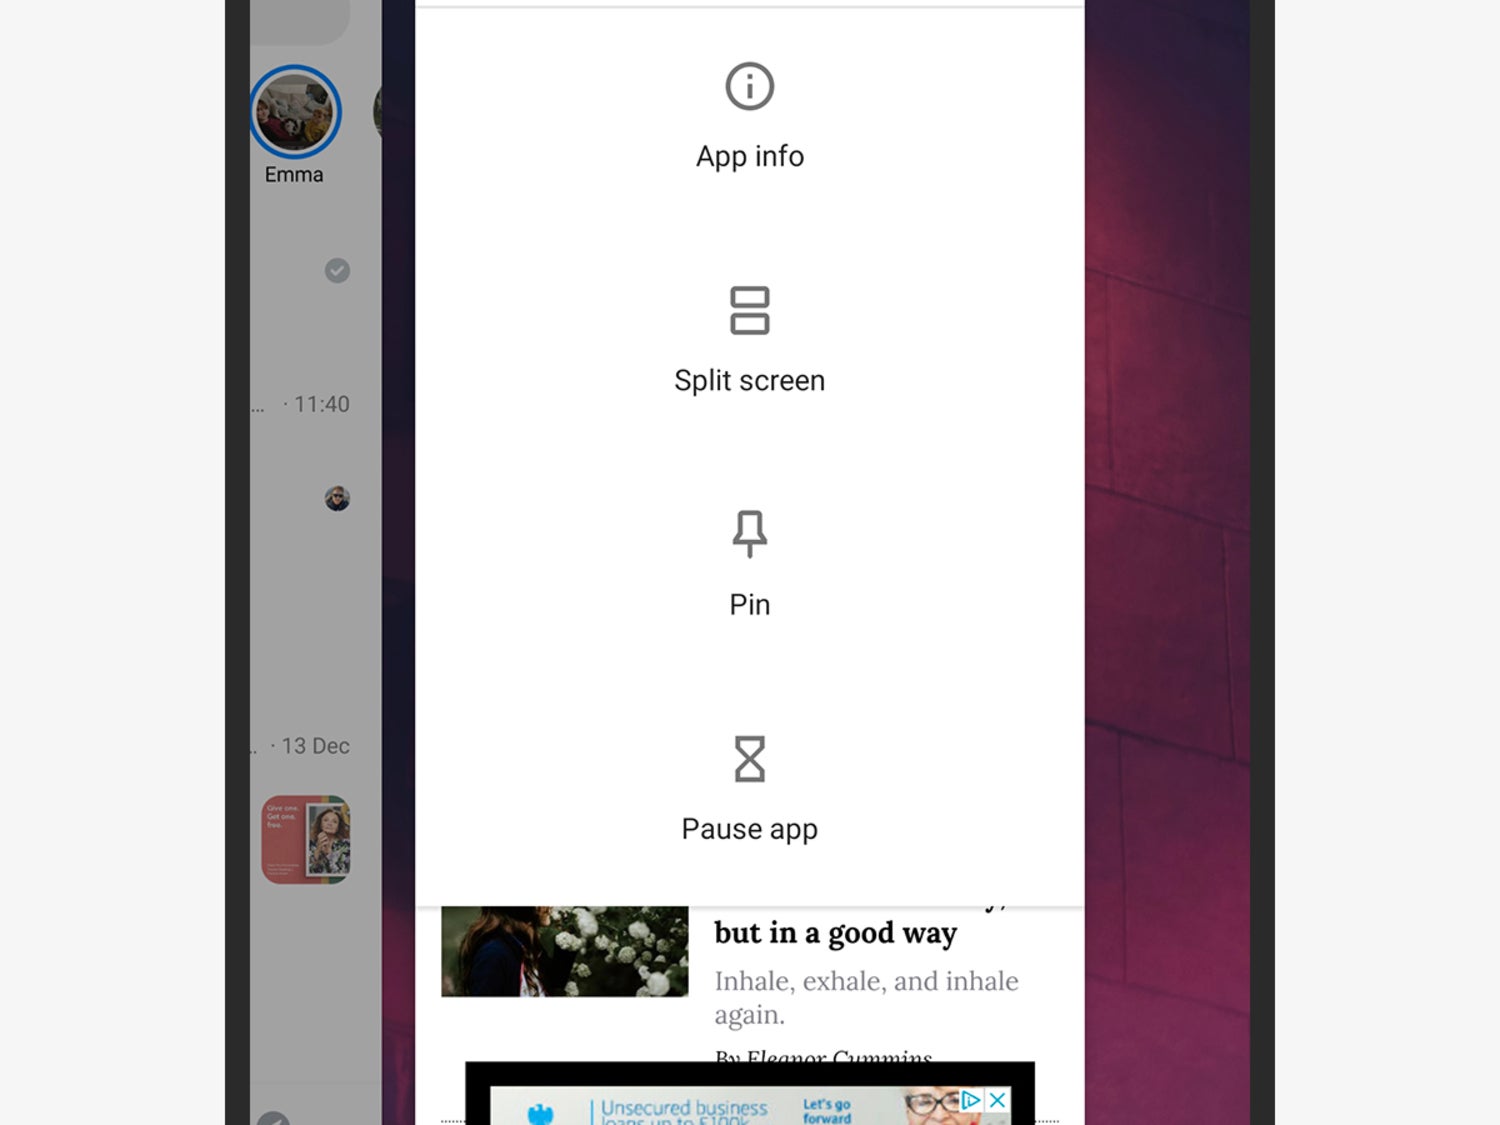 Android's Screen Pinning feature for safely sharing phones.